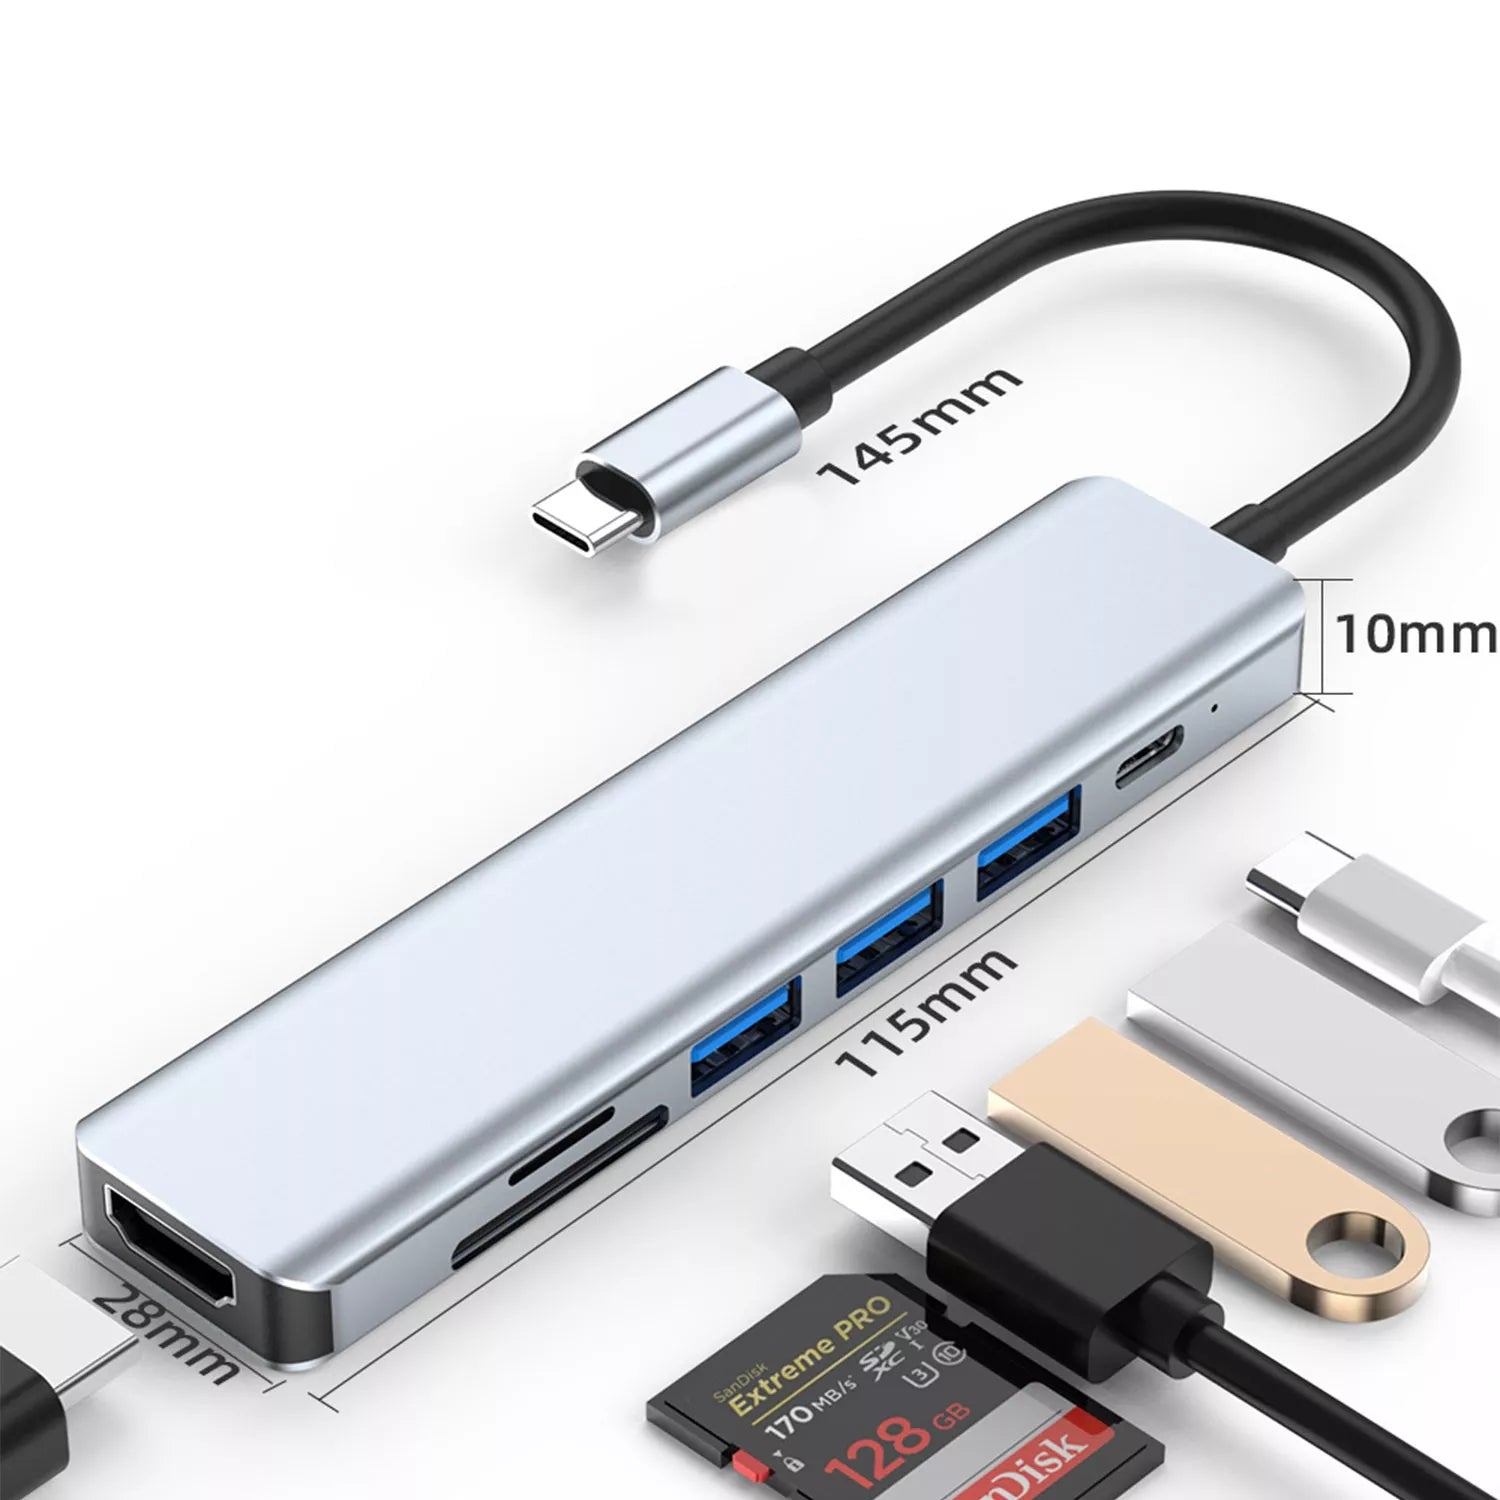 navor 7-IN-1 USB C Hub for MacBook, Thunderbolt 3/4, Samsung and More